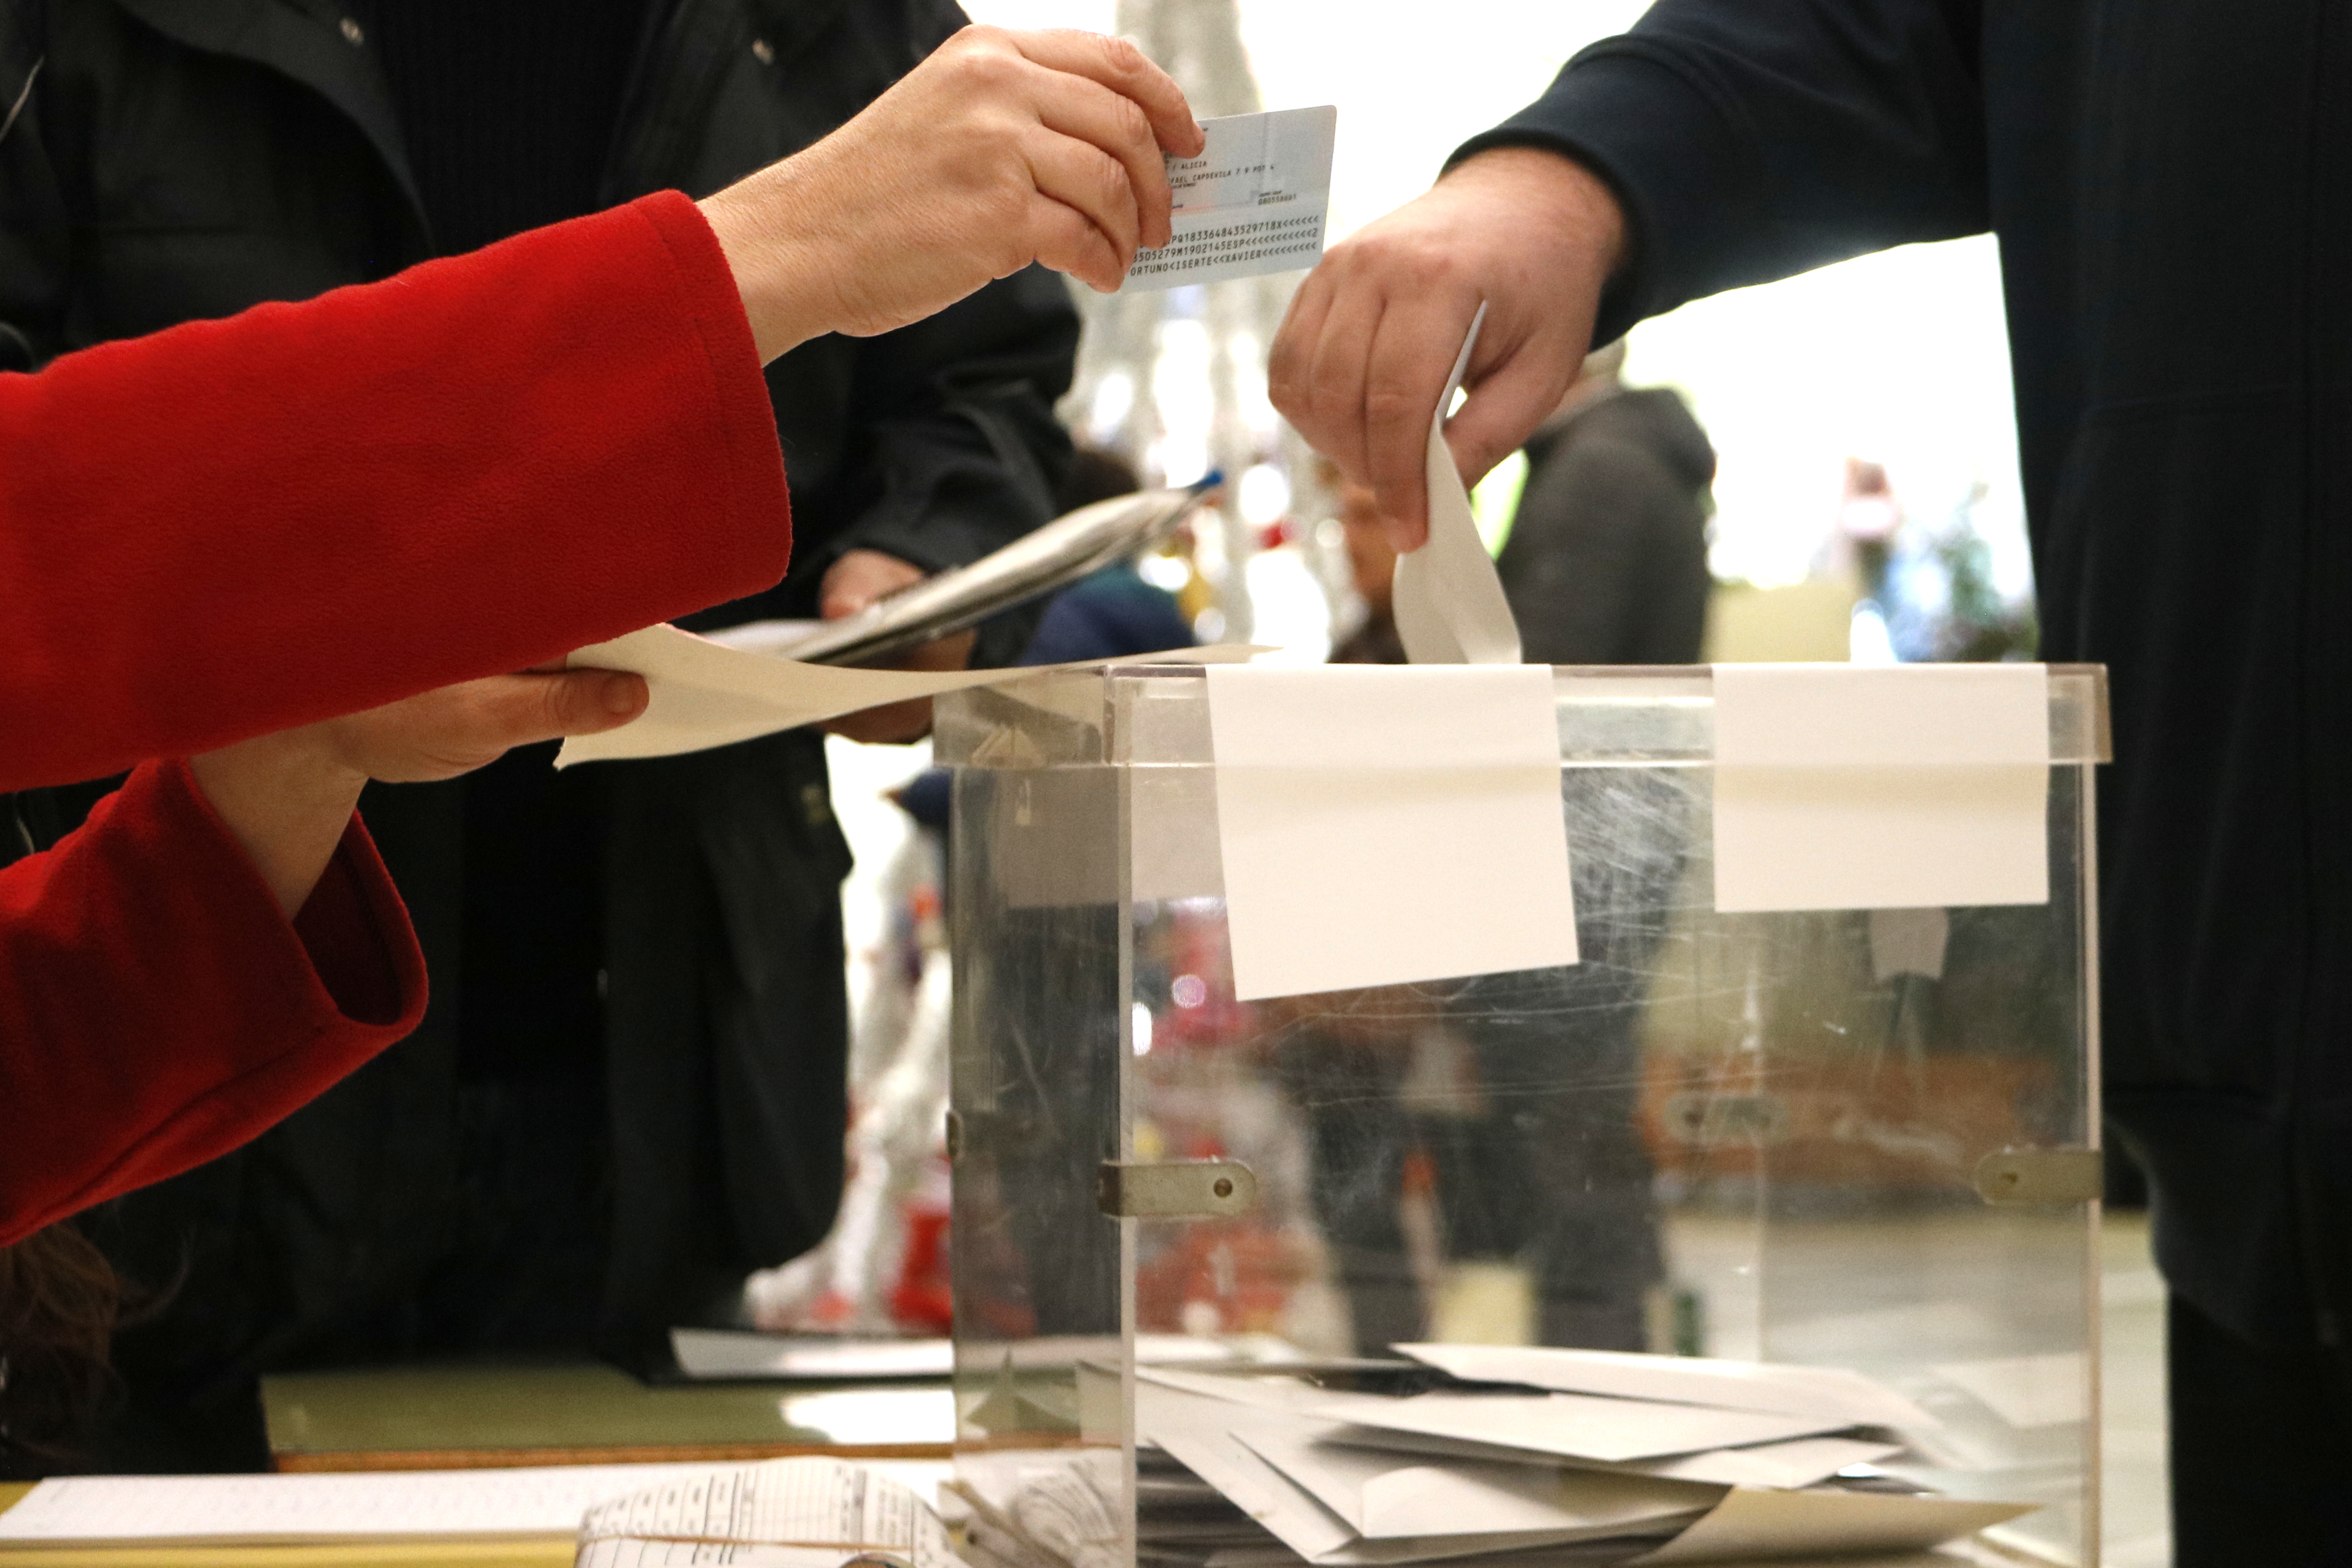 A man votes at Farigola polling station in Barcelona for the December 21 elections in 2017 (by Rafa Garrido)